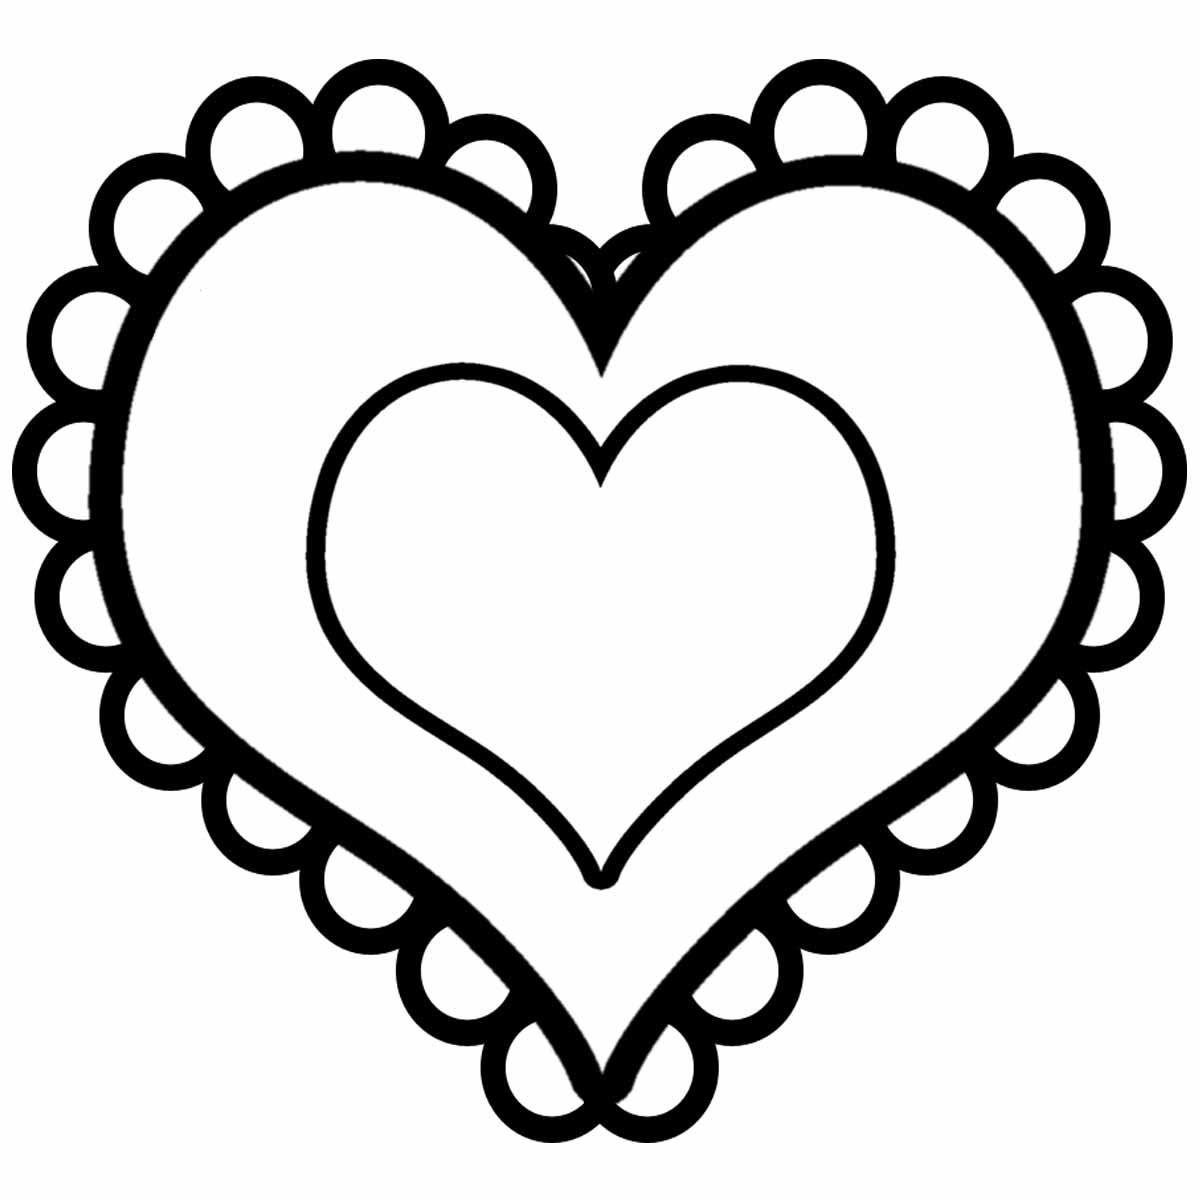 Clip Art Hearts Intertwined | Clipart library - Free Clipart Images